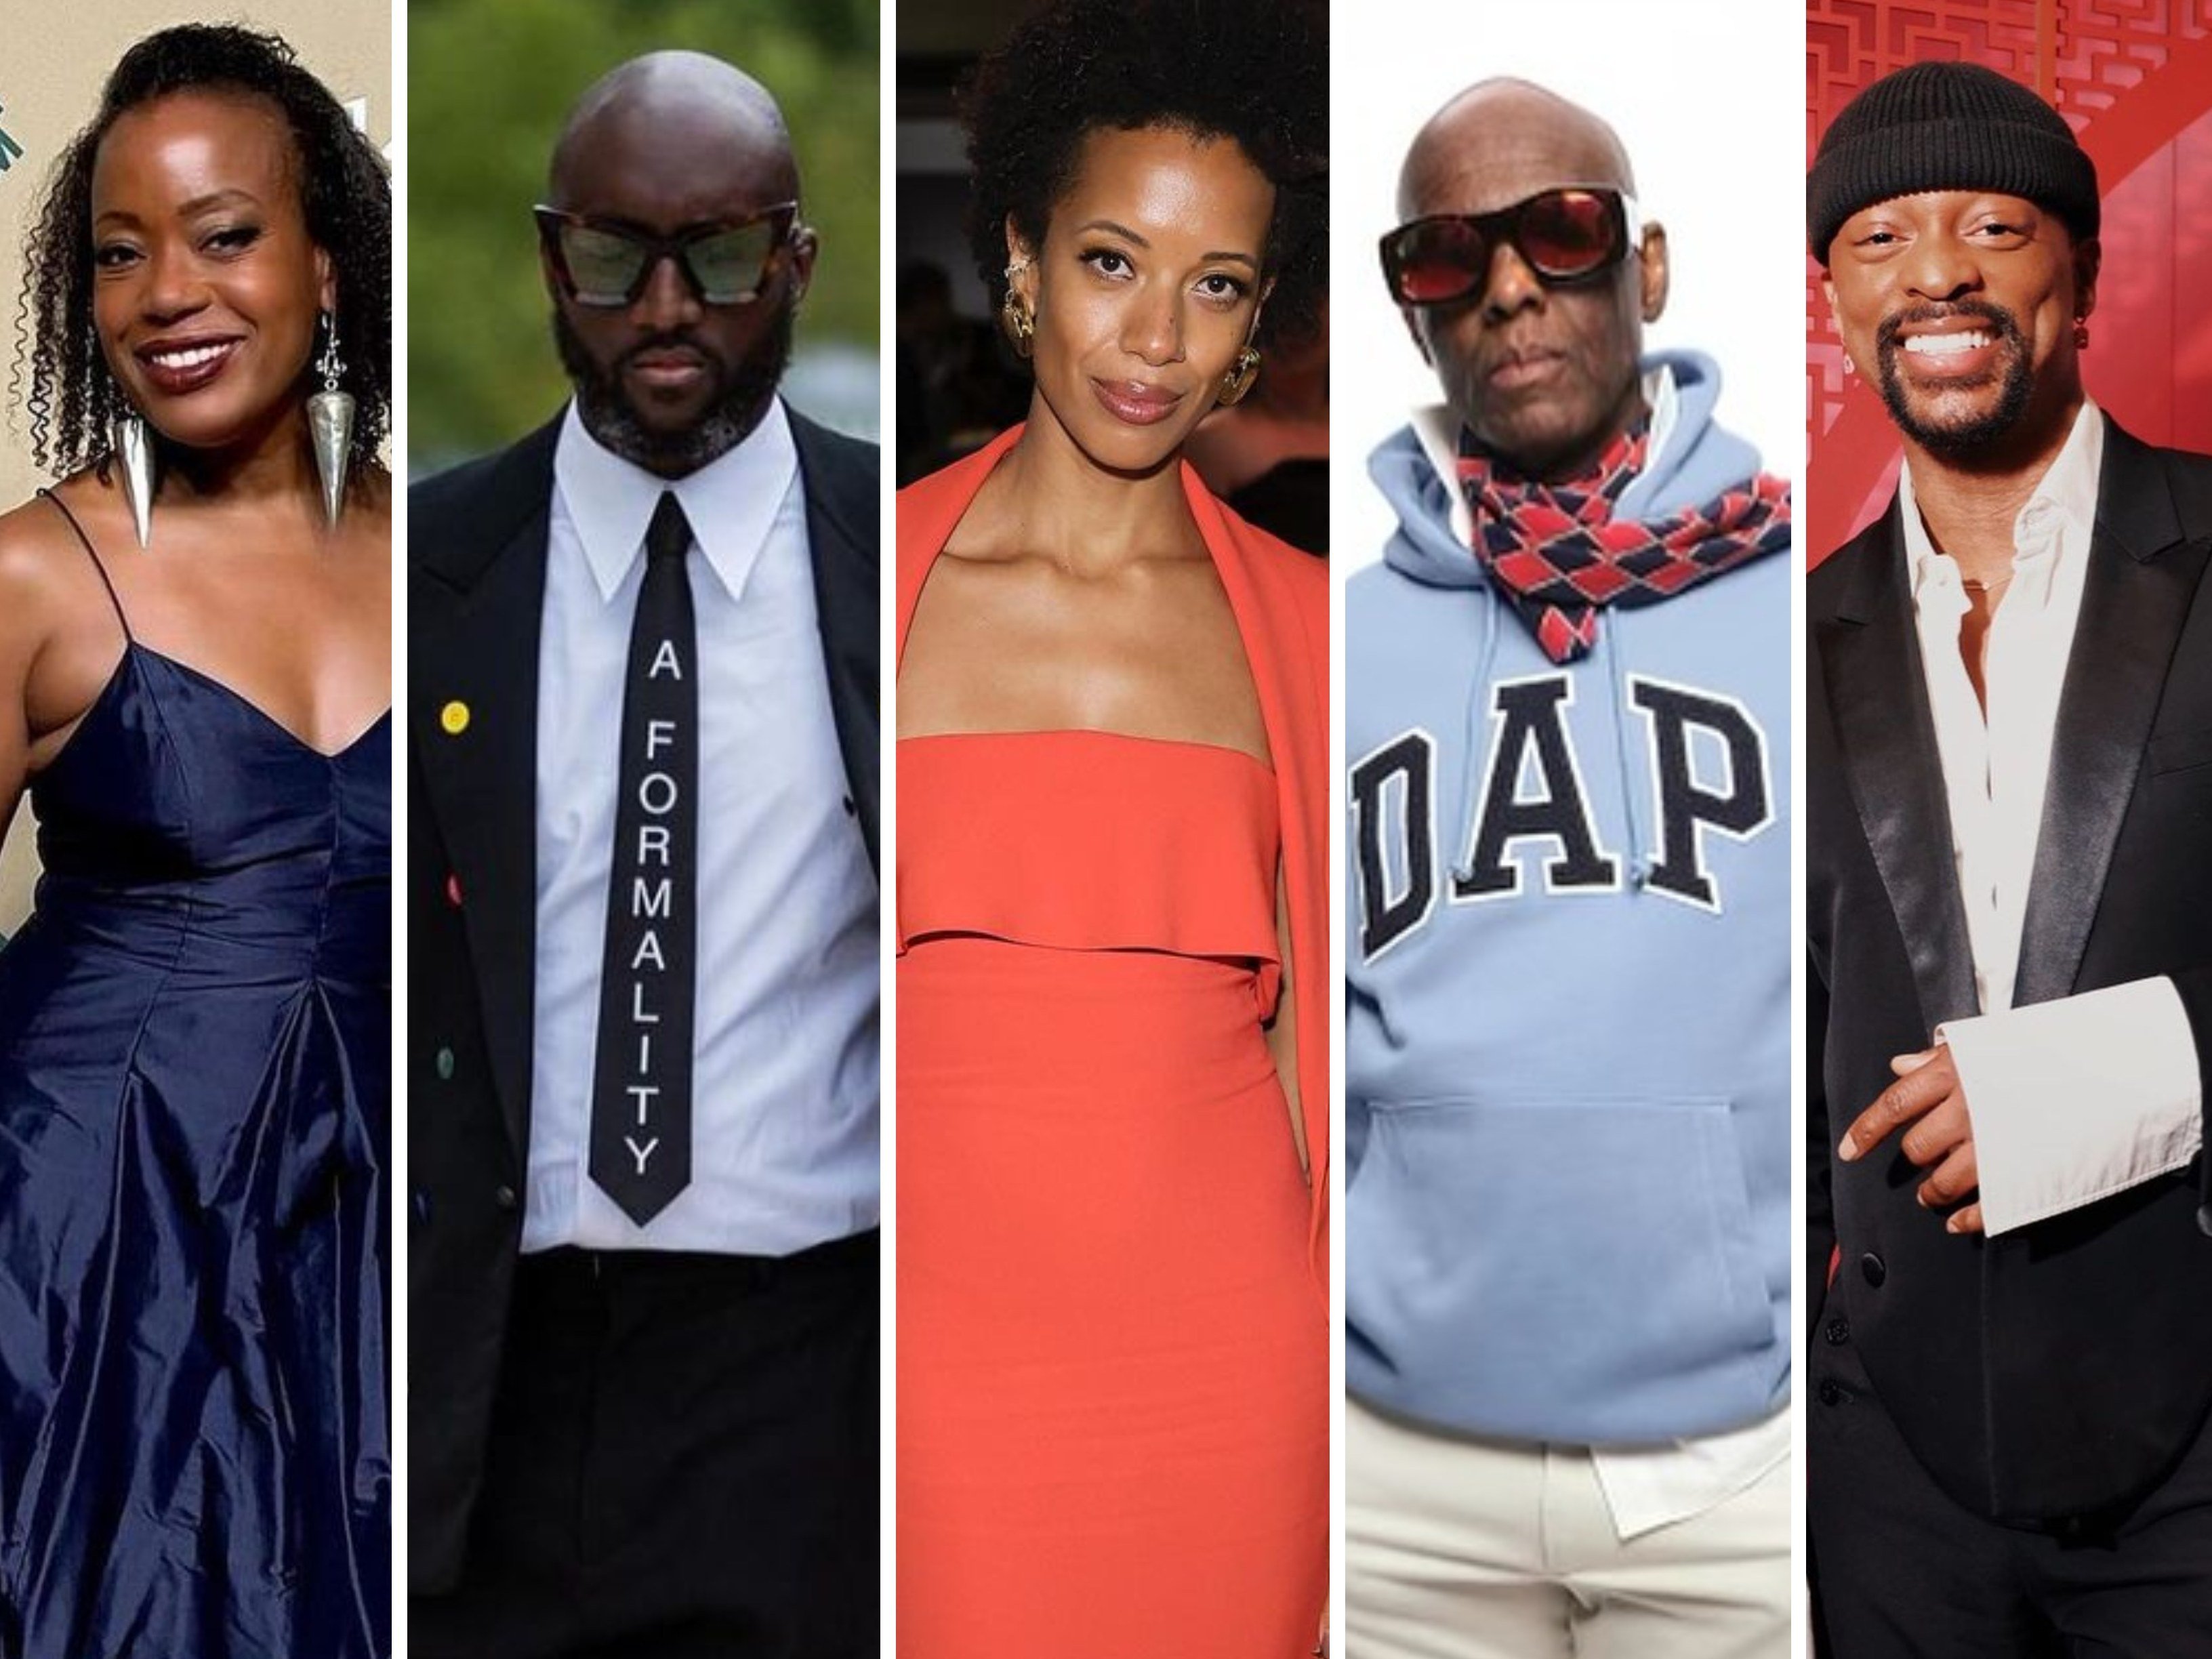 9 black fashion designers to know for Black History Month: from